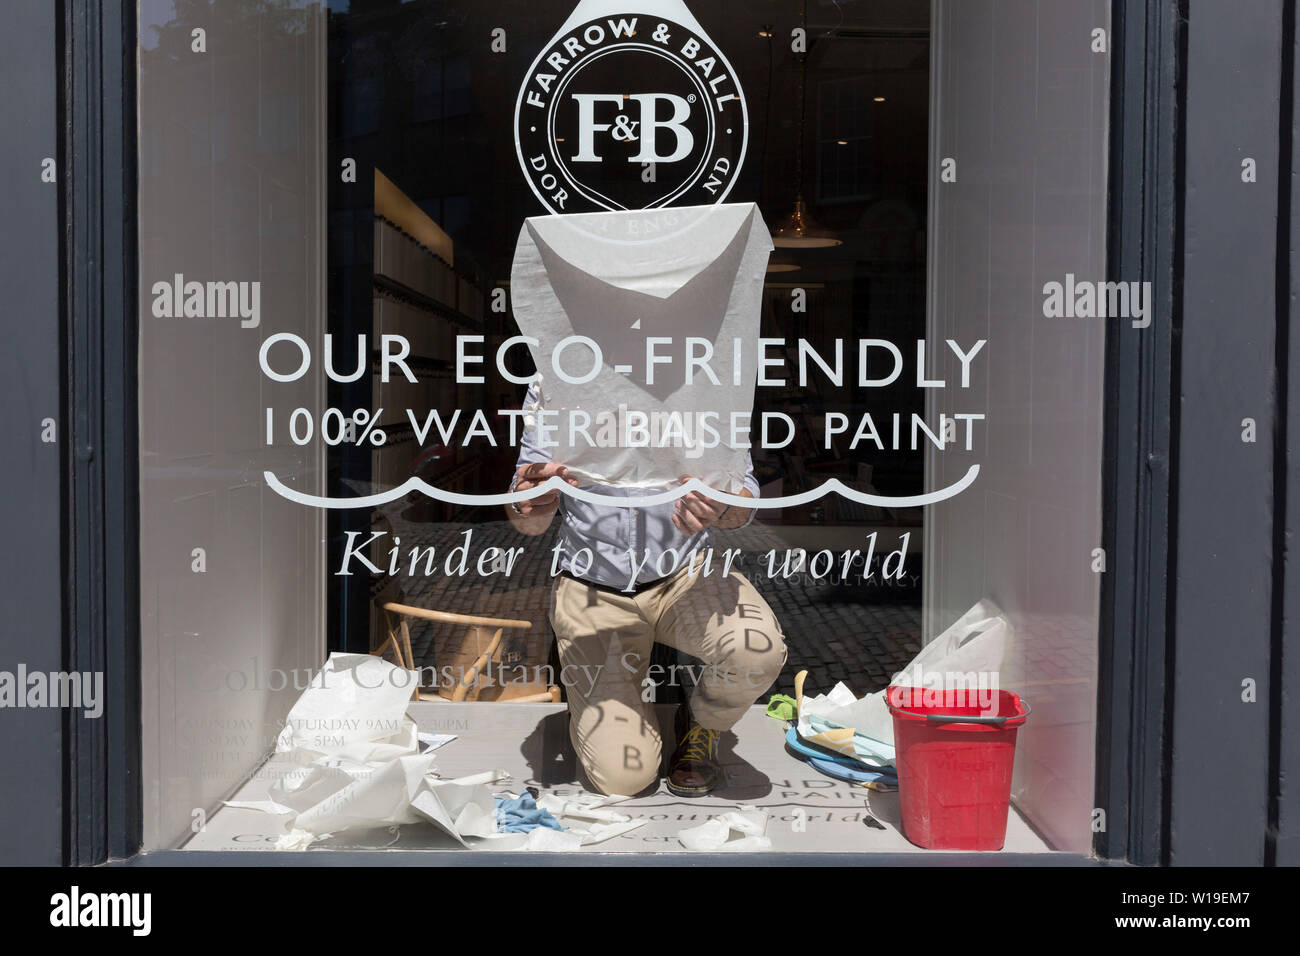 Unpeeling and sticking a window stencil to the glass of eco paint retailer Farrow & Ball, in Edinburgh, on 26th June 2019, in Edinburgh, Scotland. Stock Photo